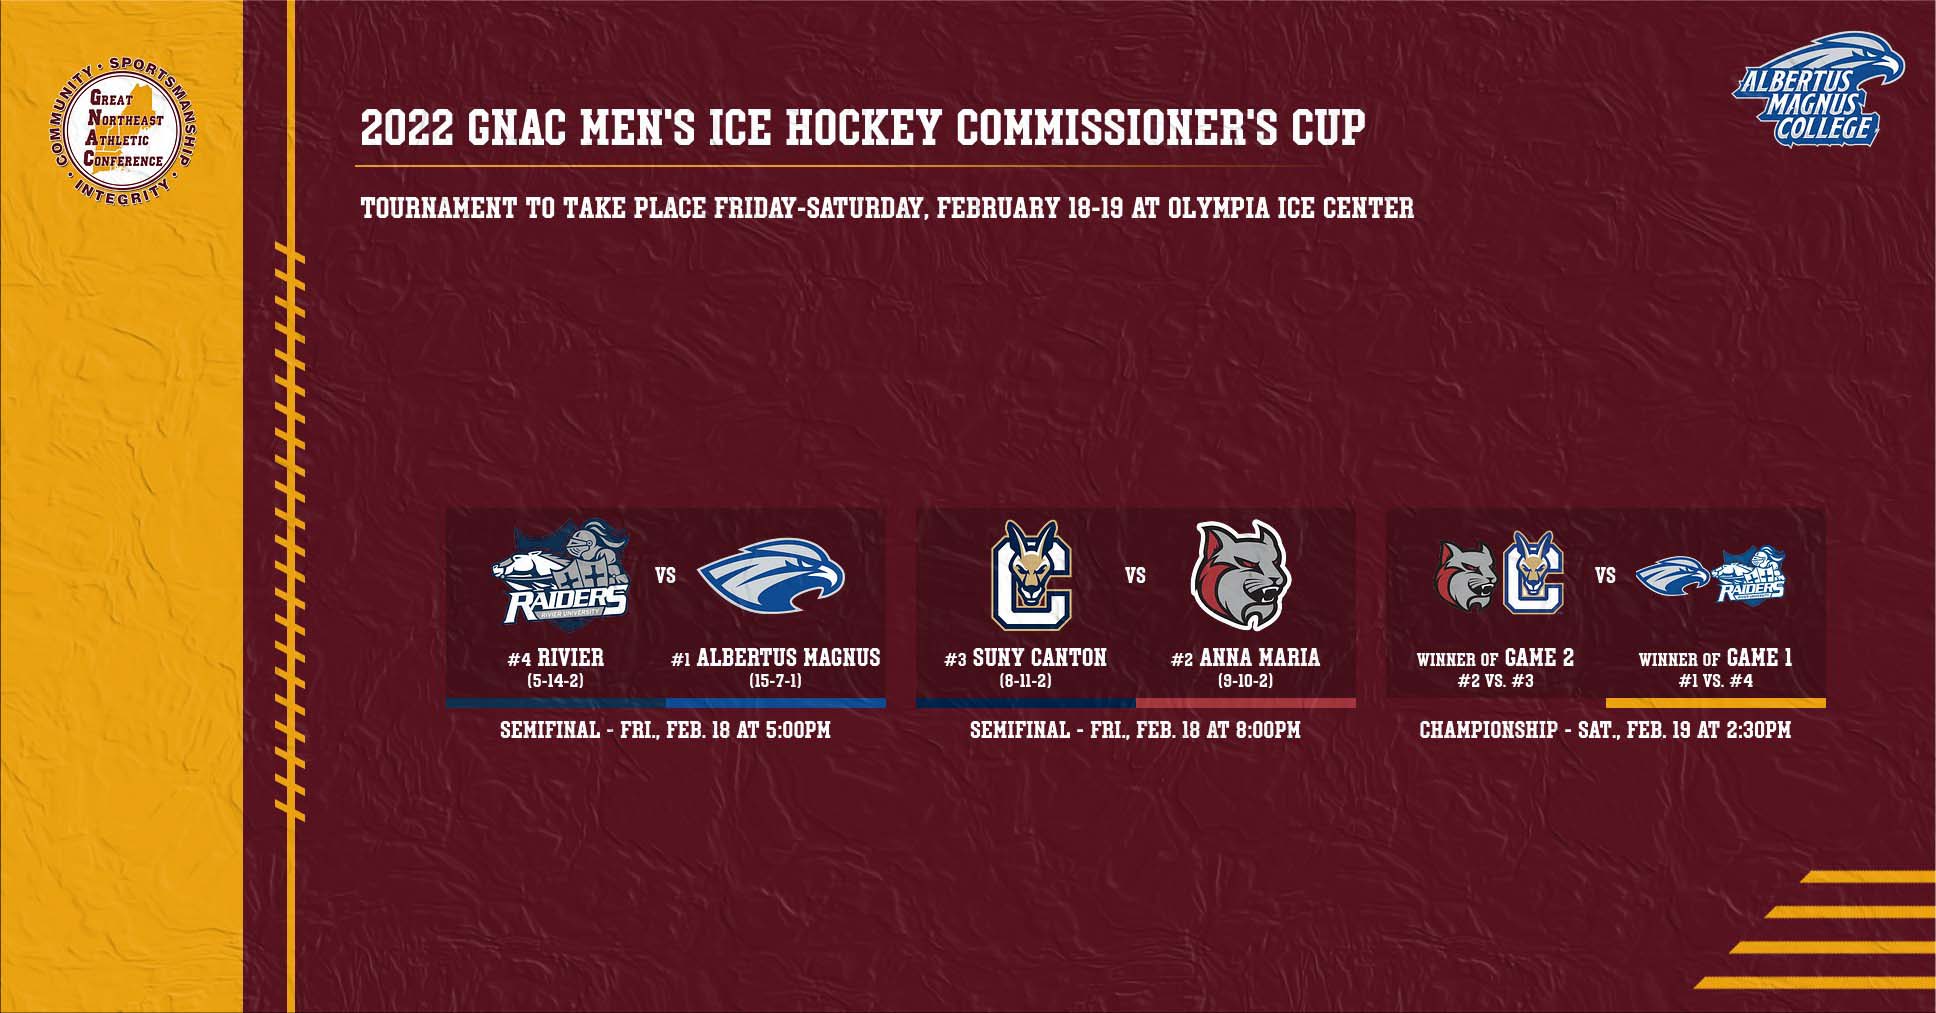 Four Teams Selected to Compete in Inaugural 2022 GNAC Men's Ice Hockey Commissioner's Cup Event in Springfield